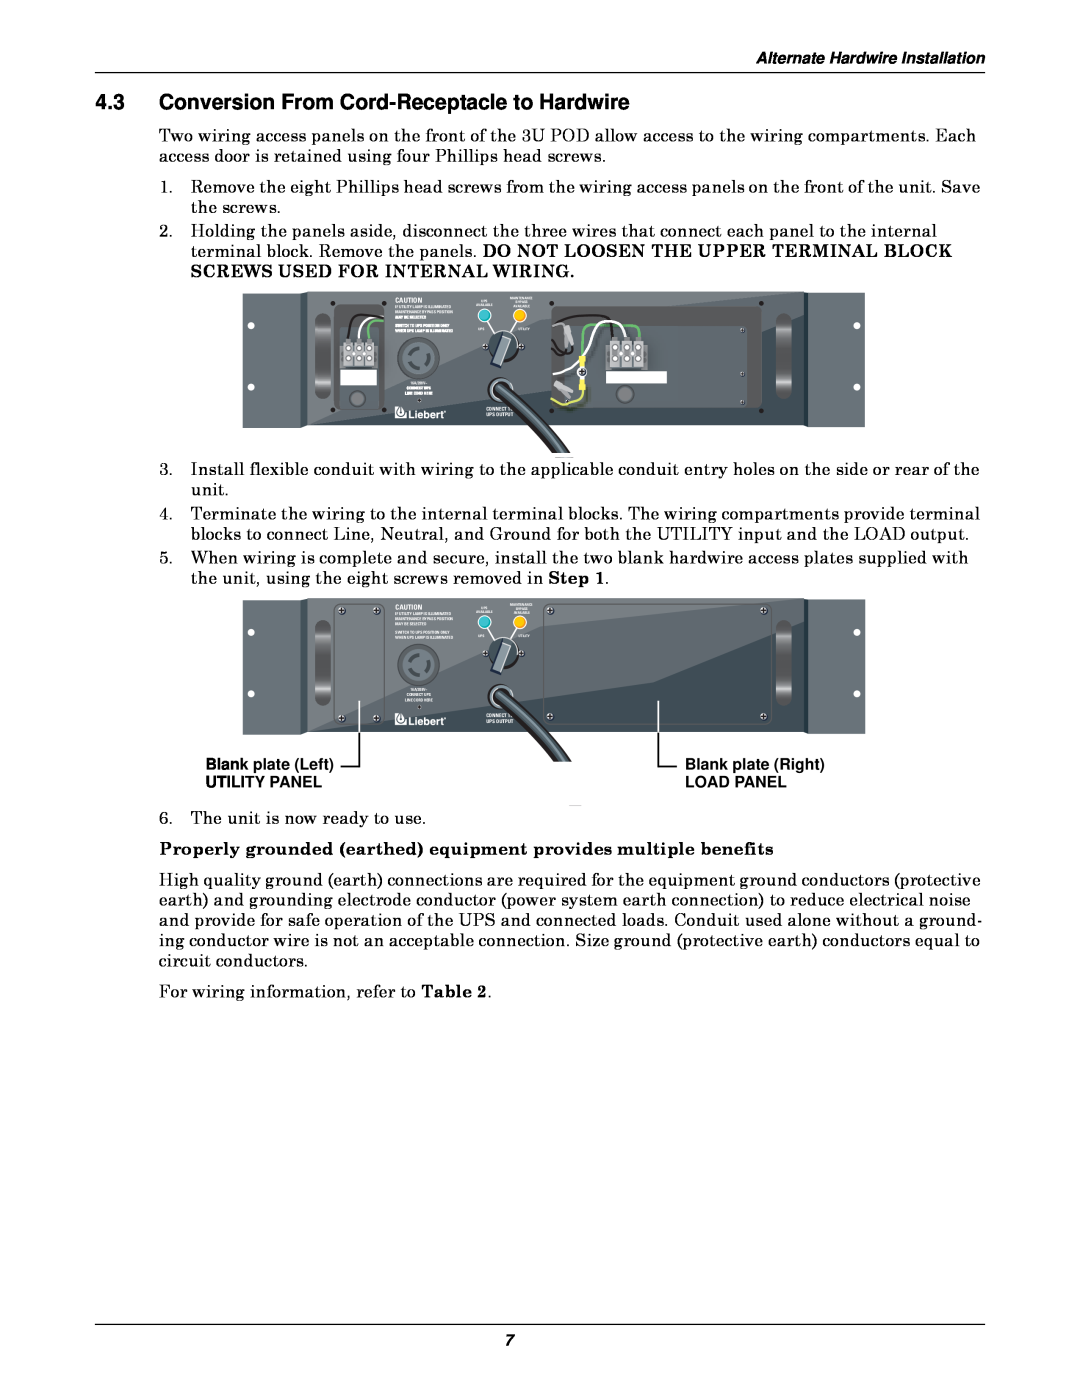 Emerson 3U MP2-220N user manual Conversion From Cord-Receptacle to Hardwire, Screws Used For Internal Wiring 